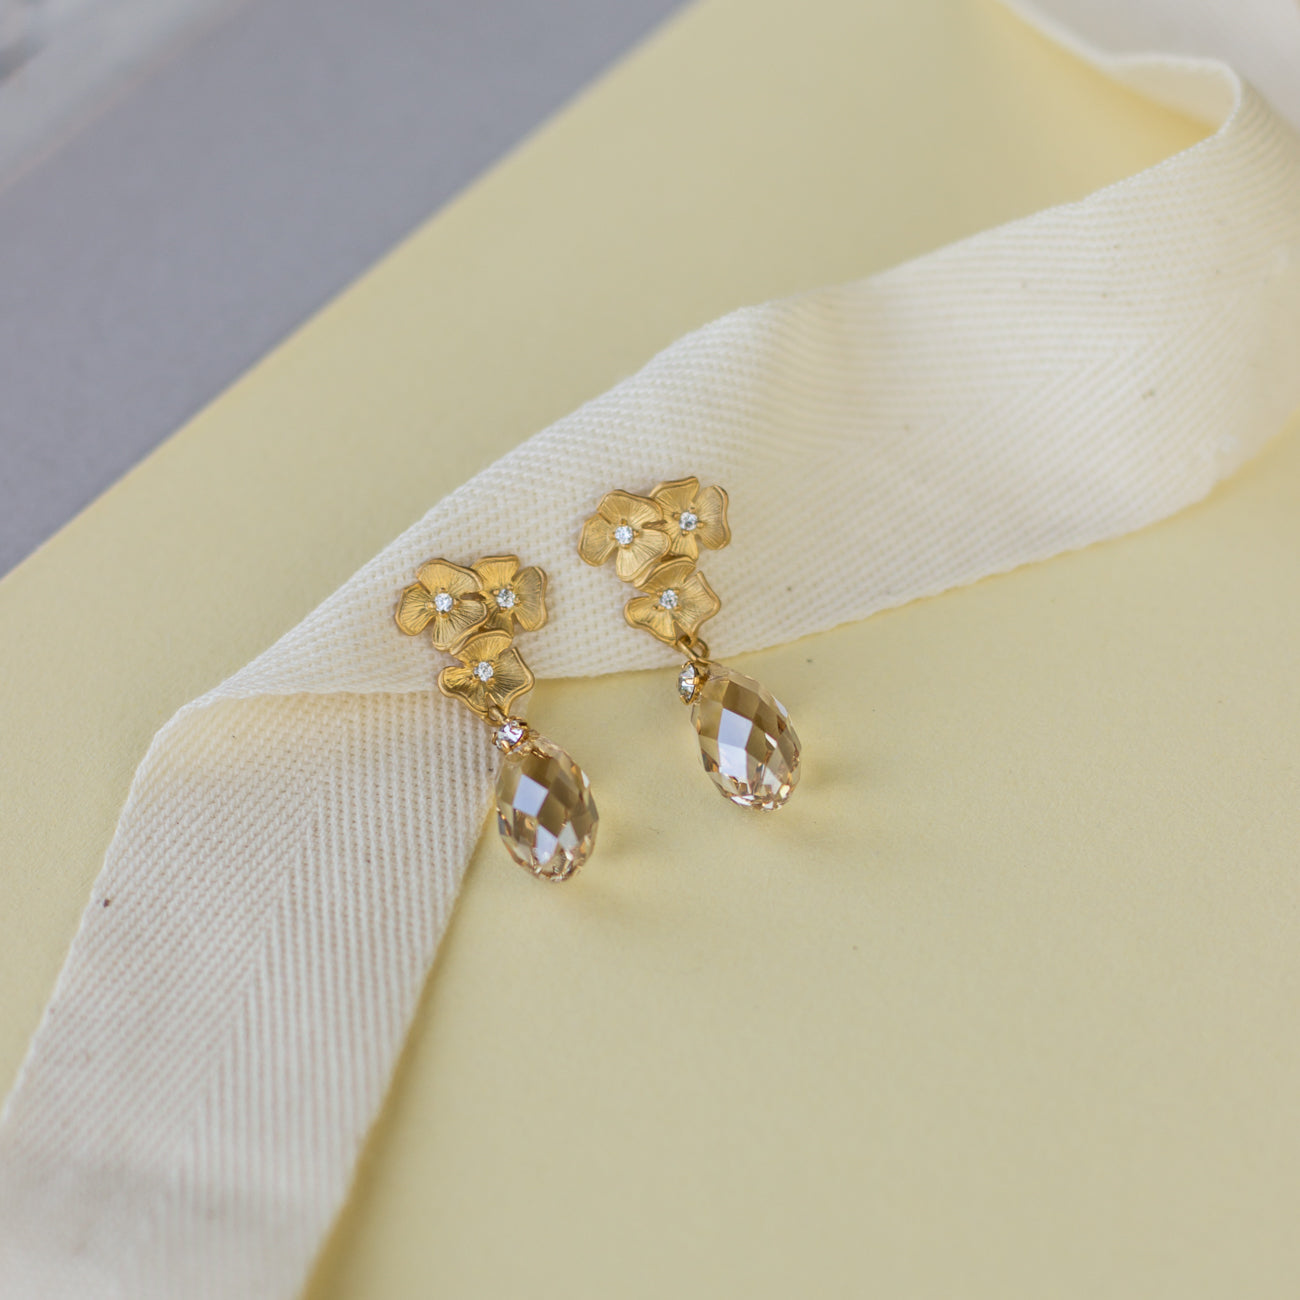 Discover these elegant crystal earrings featuring delicate floral studs and drop-shaped Swarovski golden shadow crystals, perfect for any occasion.